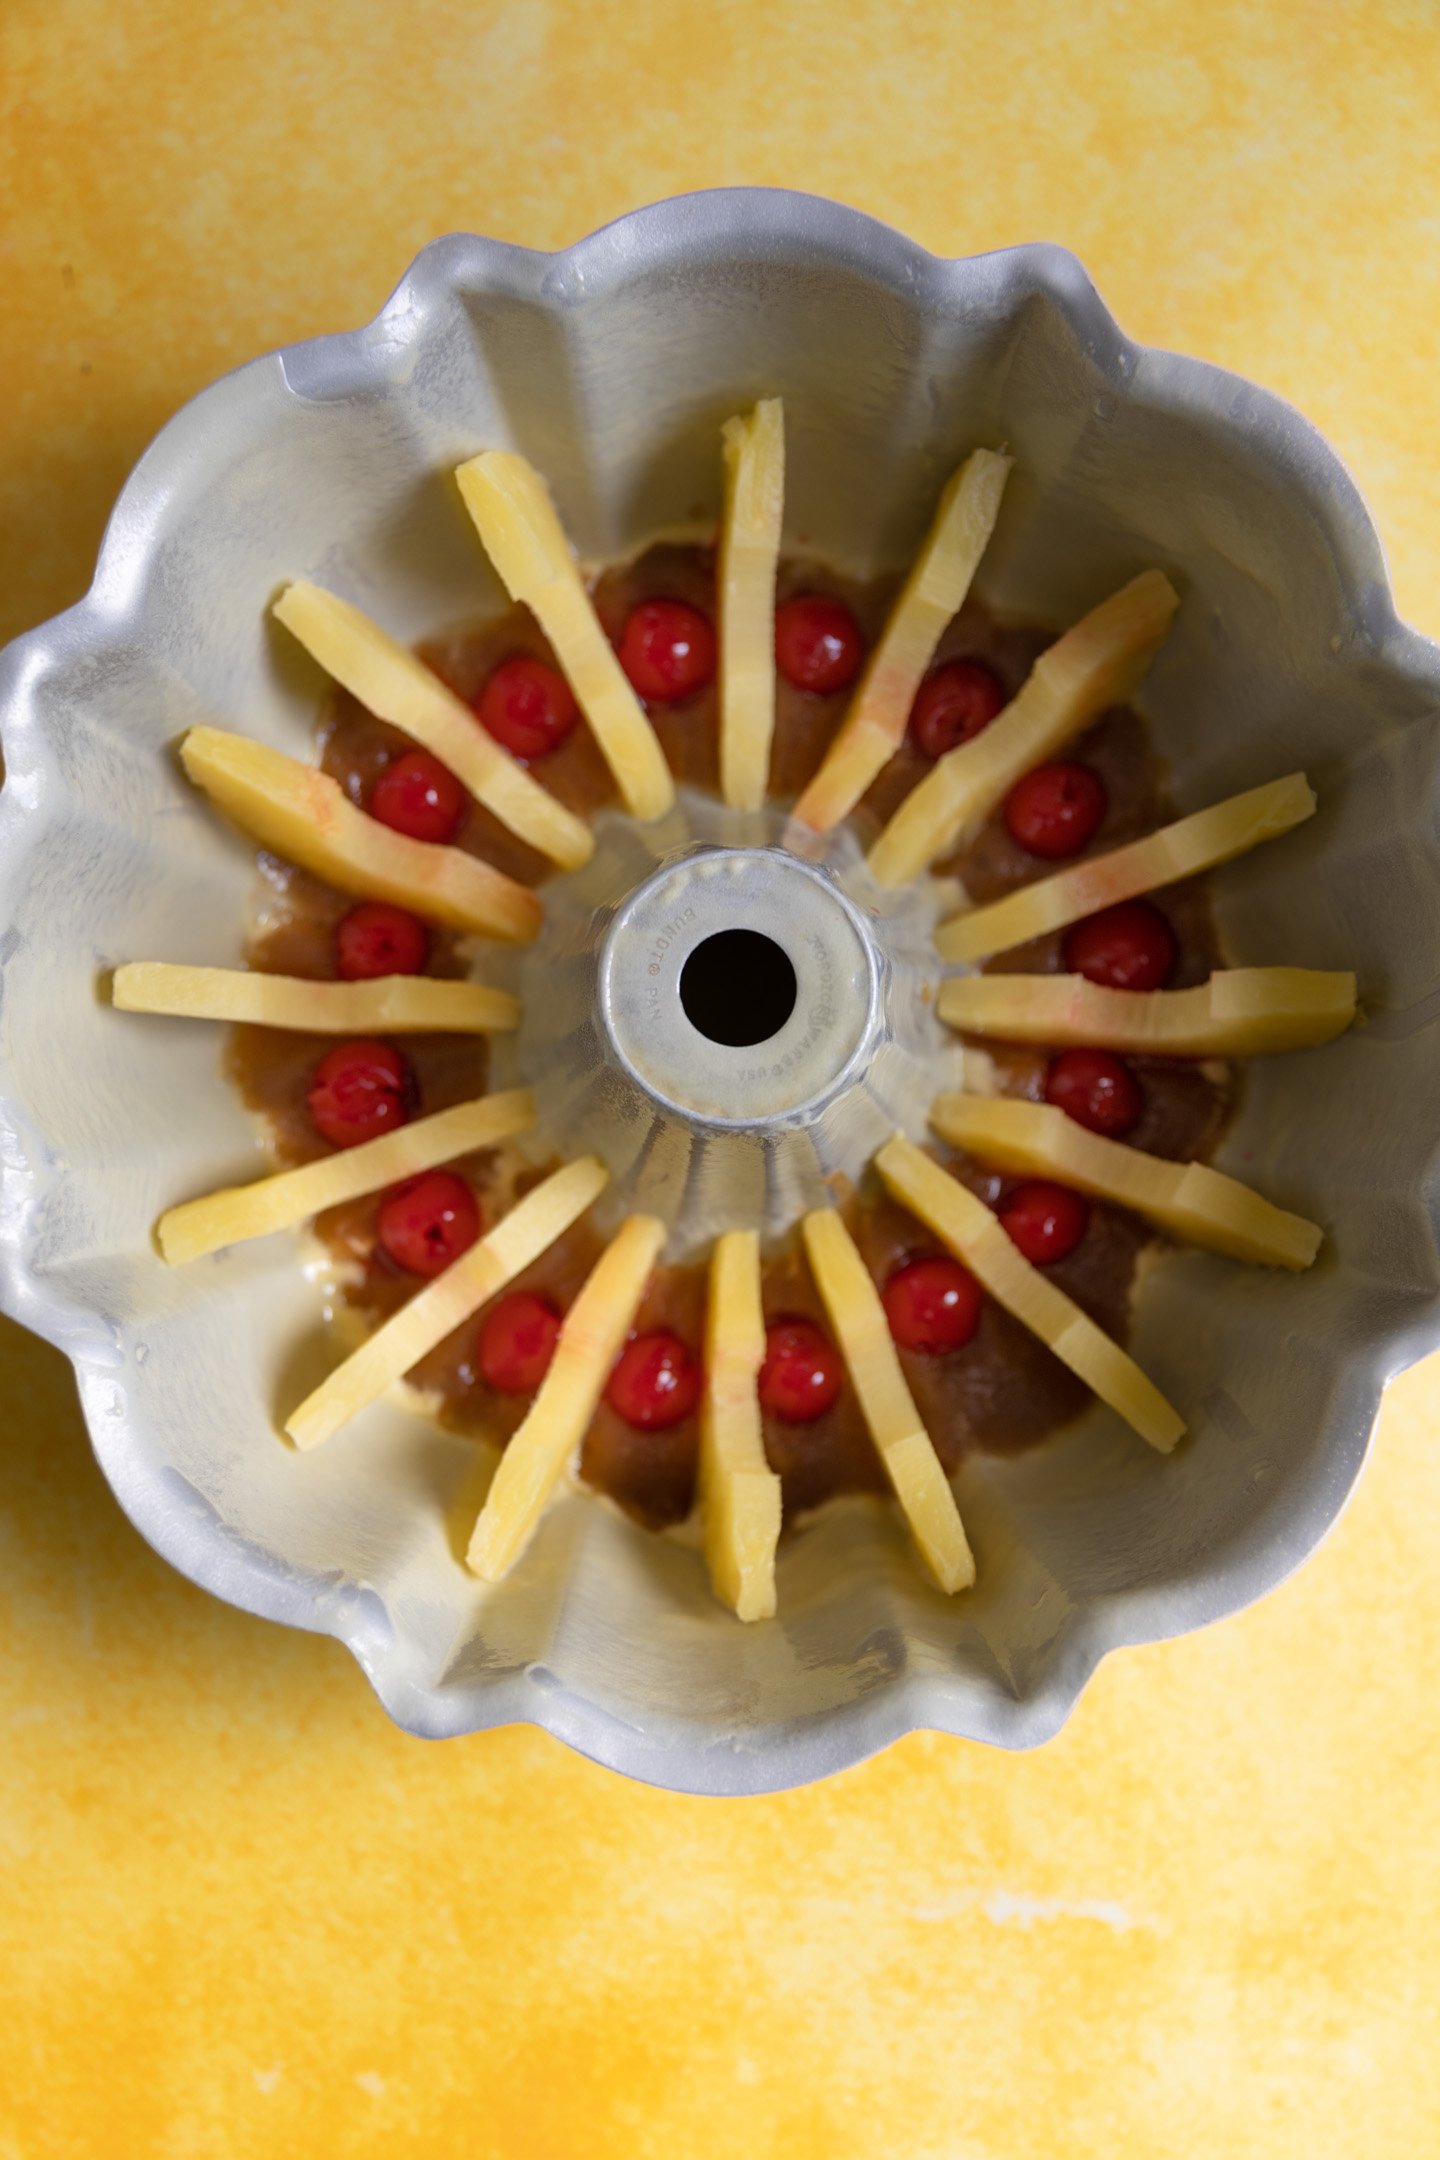 Pineapple slices and cherries lined in a bundt pan.